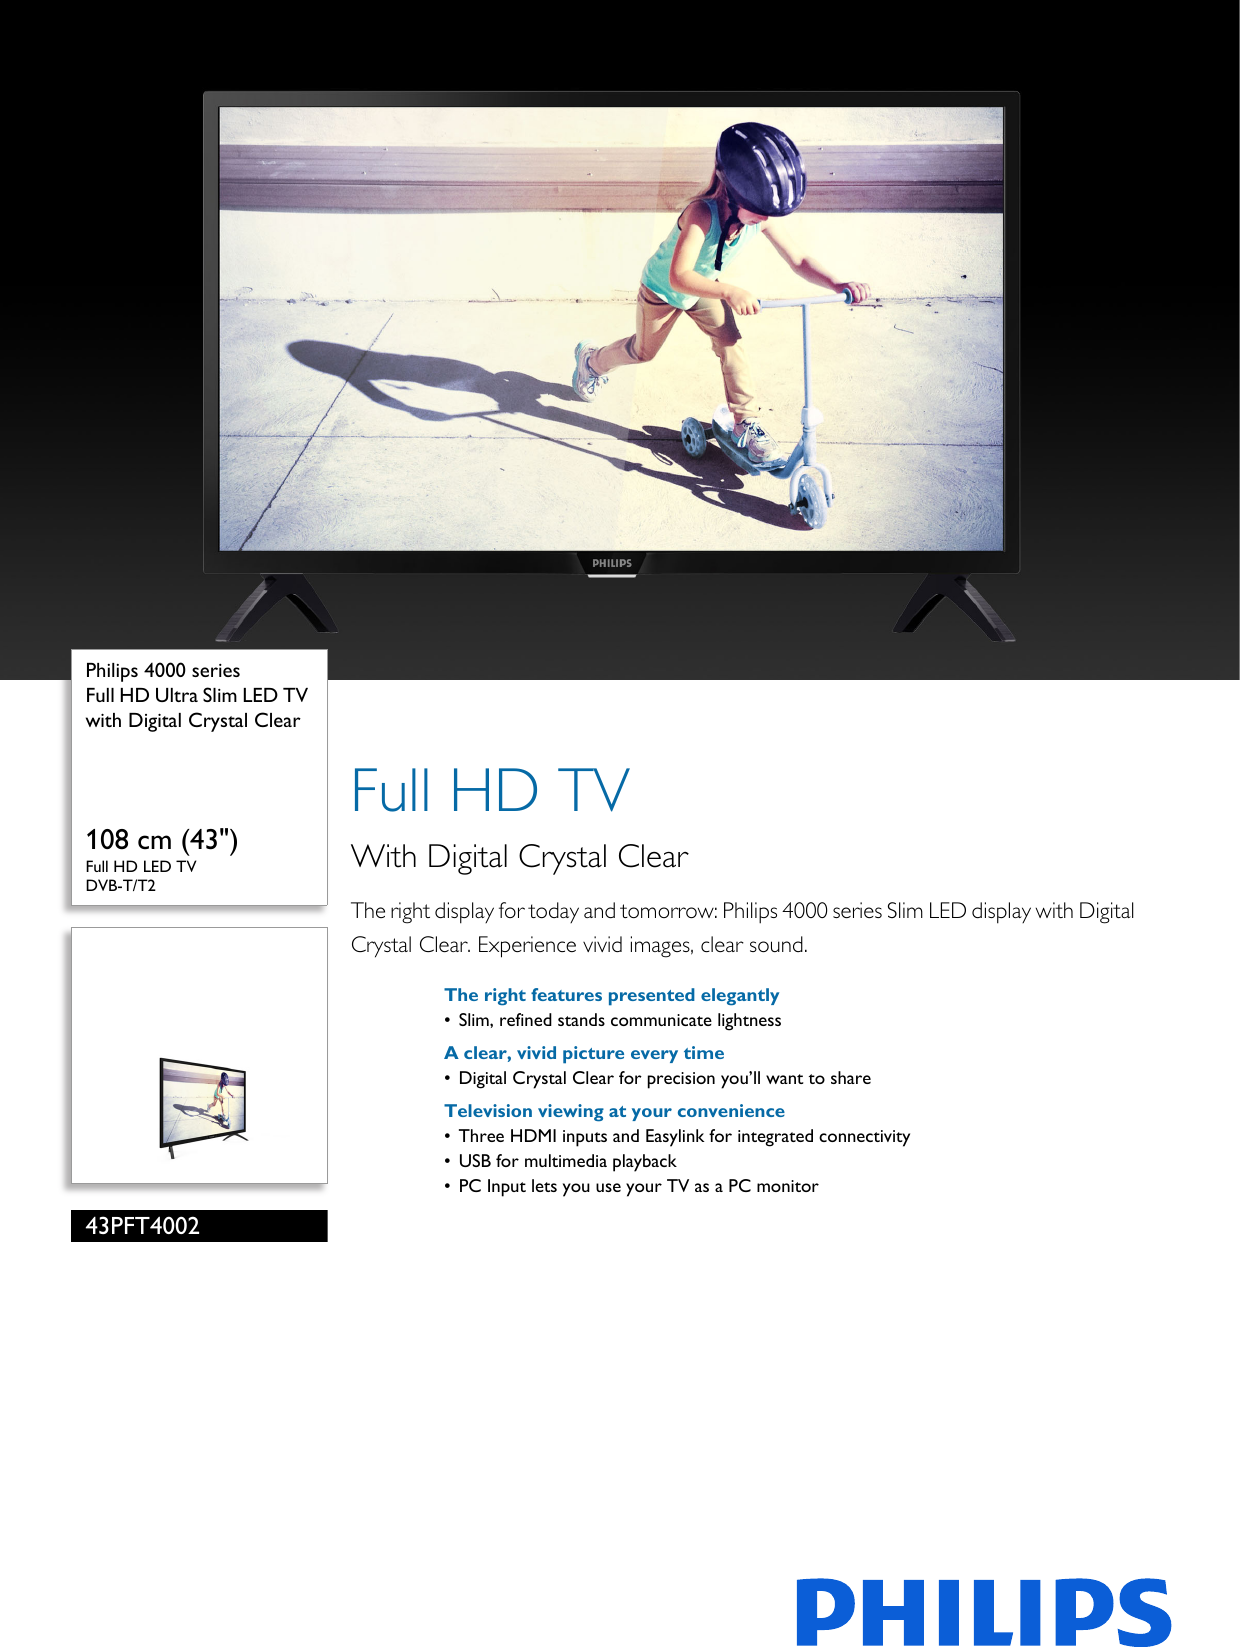 Page 1 of 2 - Philips 43PFT4002/98 Full HD Ultra Slim LED TV With Digital Crystal Clear User Manual Leaflet 43pft4002 98 Pss Engsg